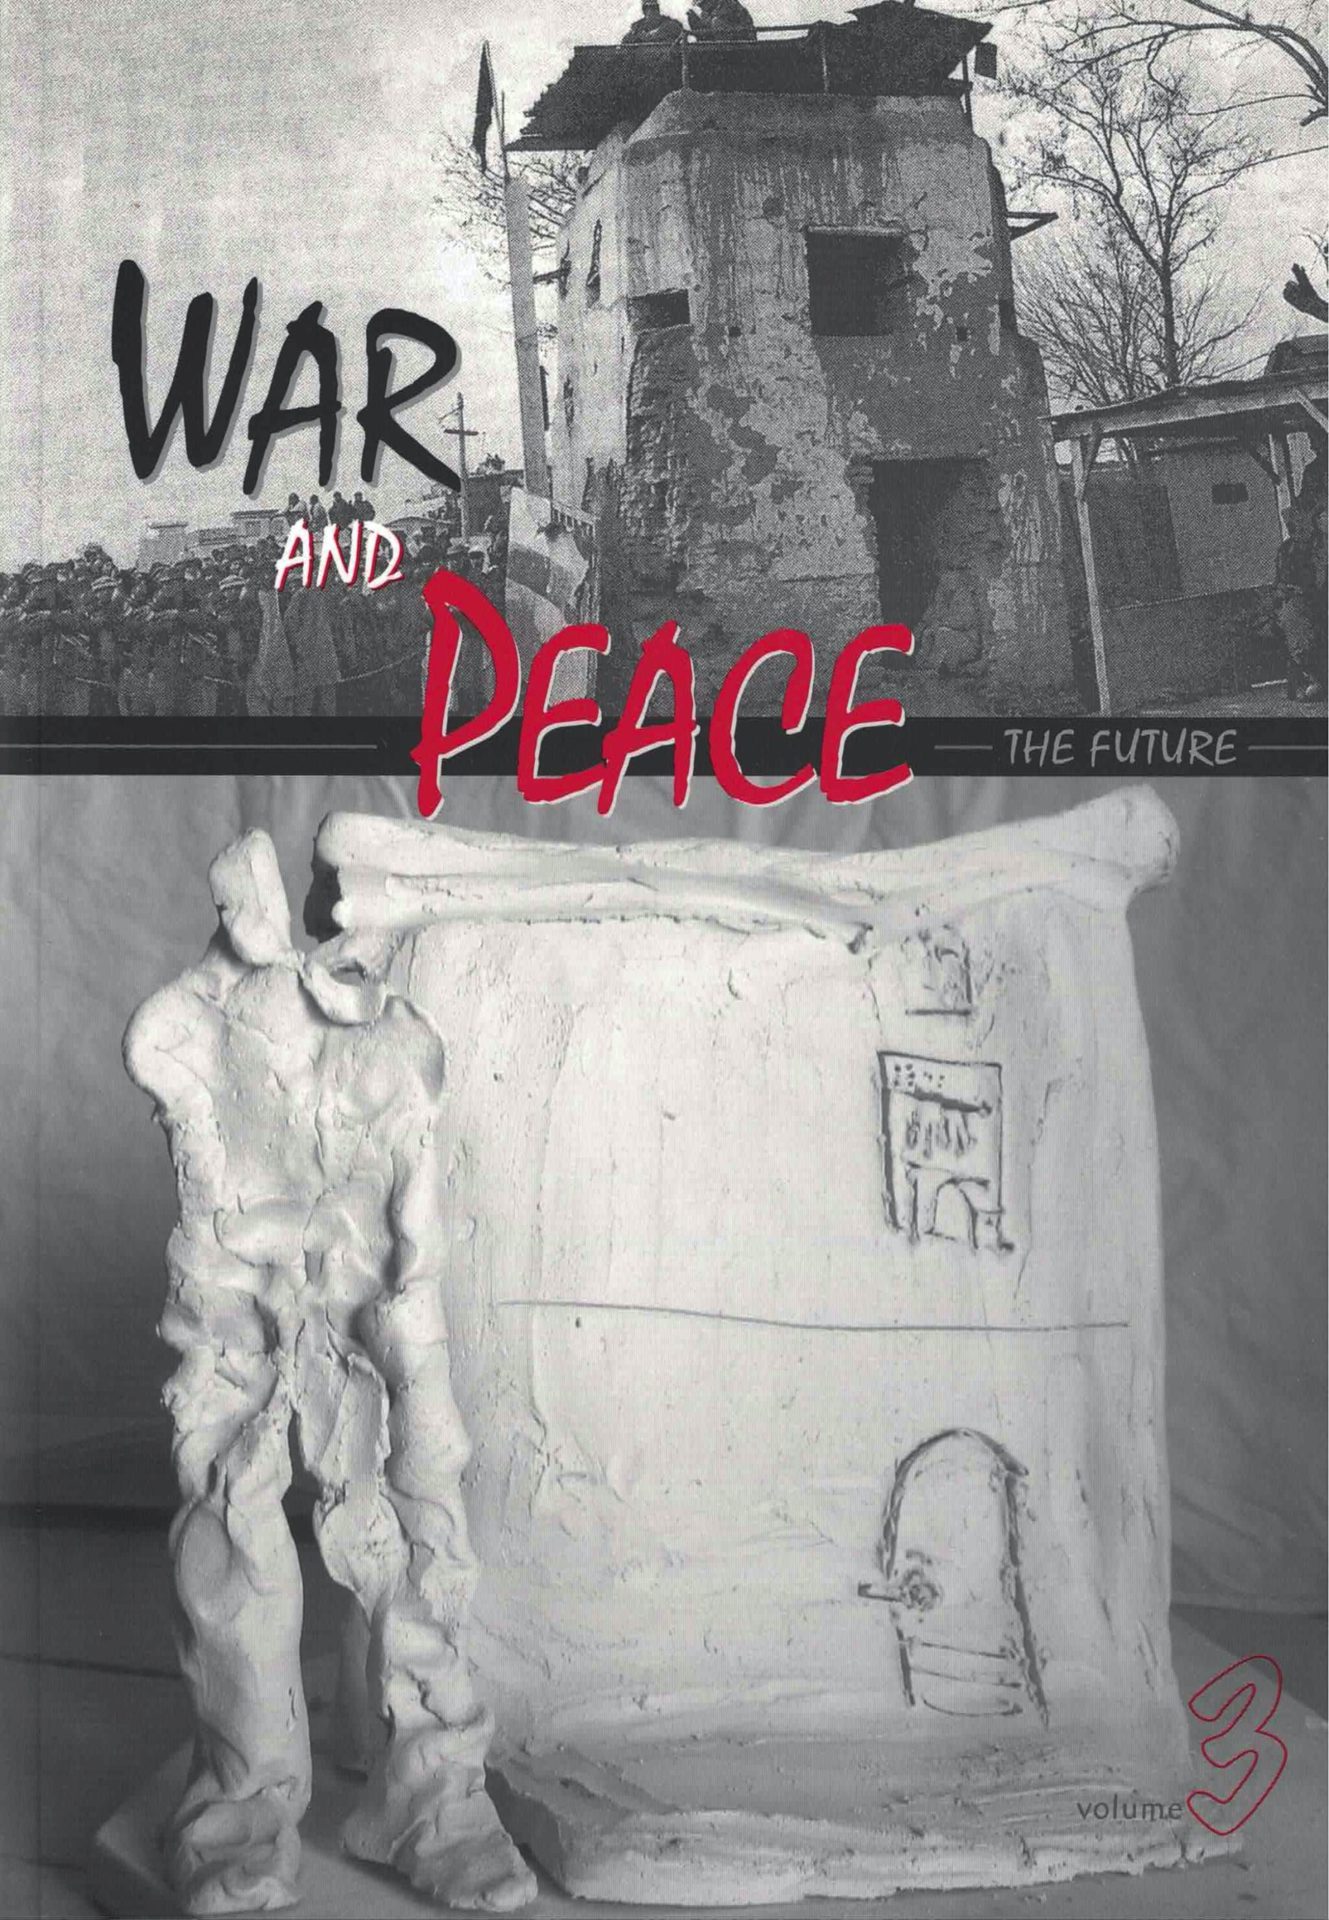 cover of War and Peace 3, the future, b&w photo of a simple recentular building at the top half of the cover with image of a clay model of a similar rectangular building